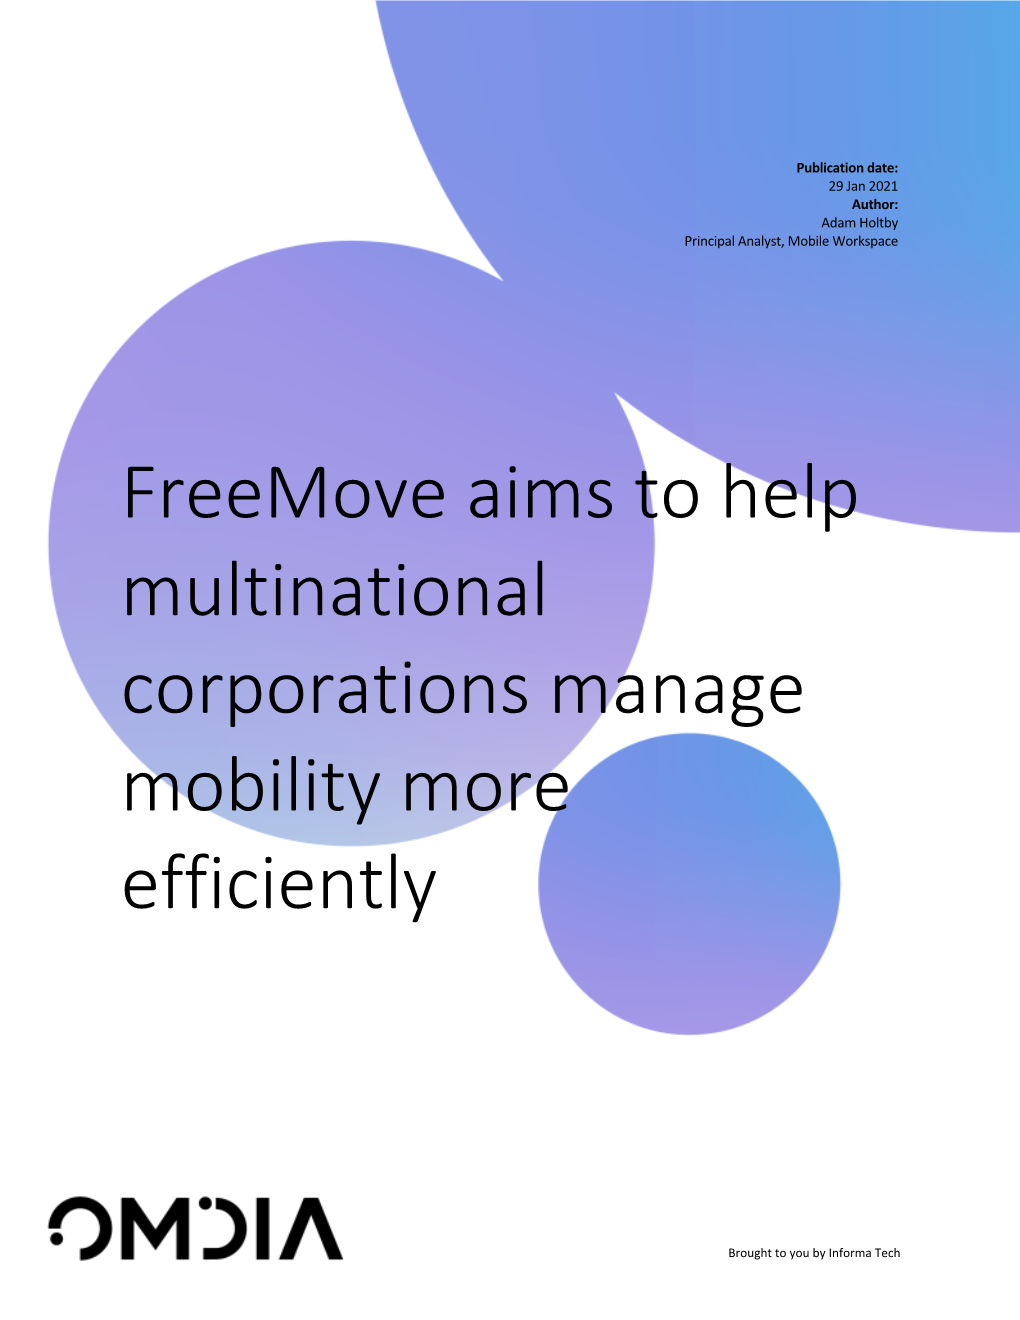 Freemove Aims to Help Multinational Corporations Manage Mobility More Efficiently